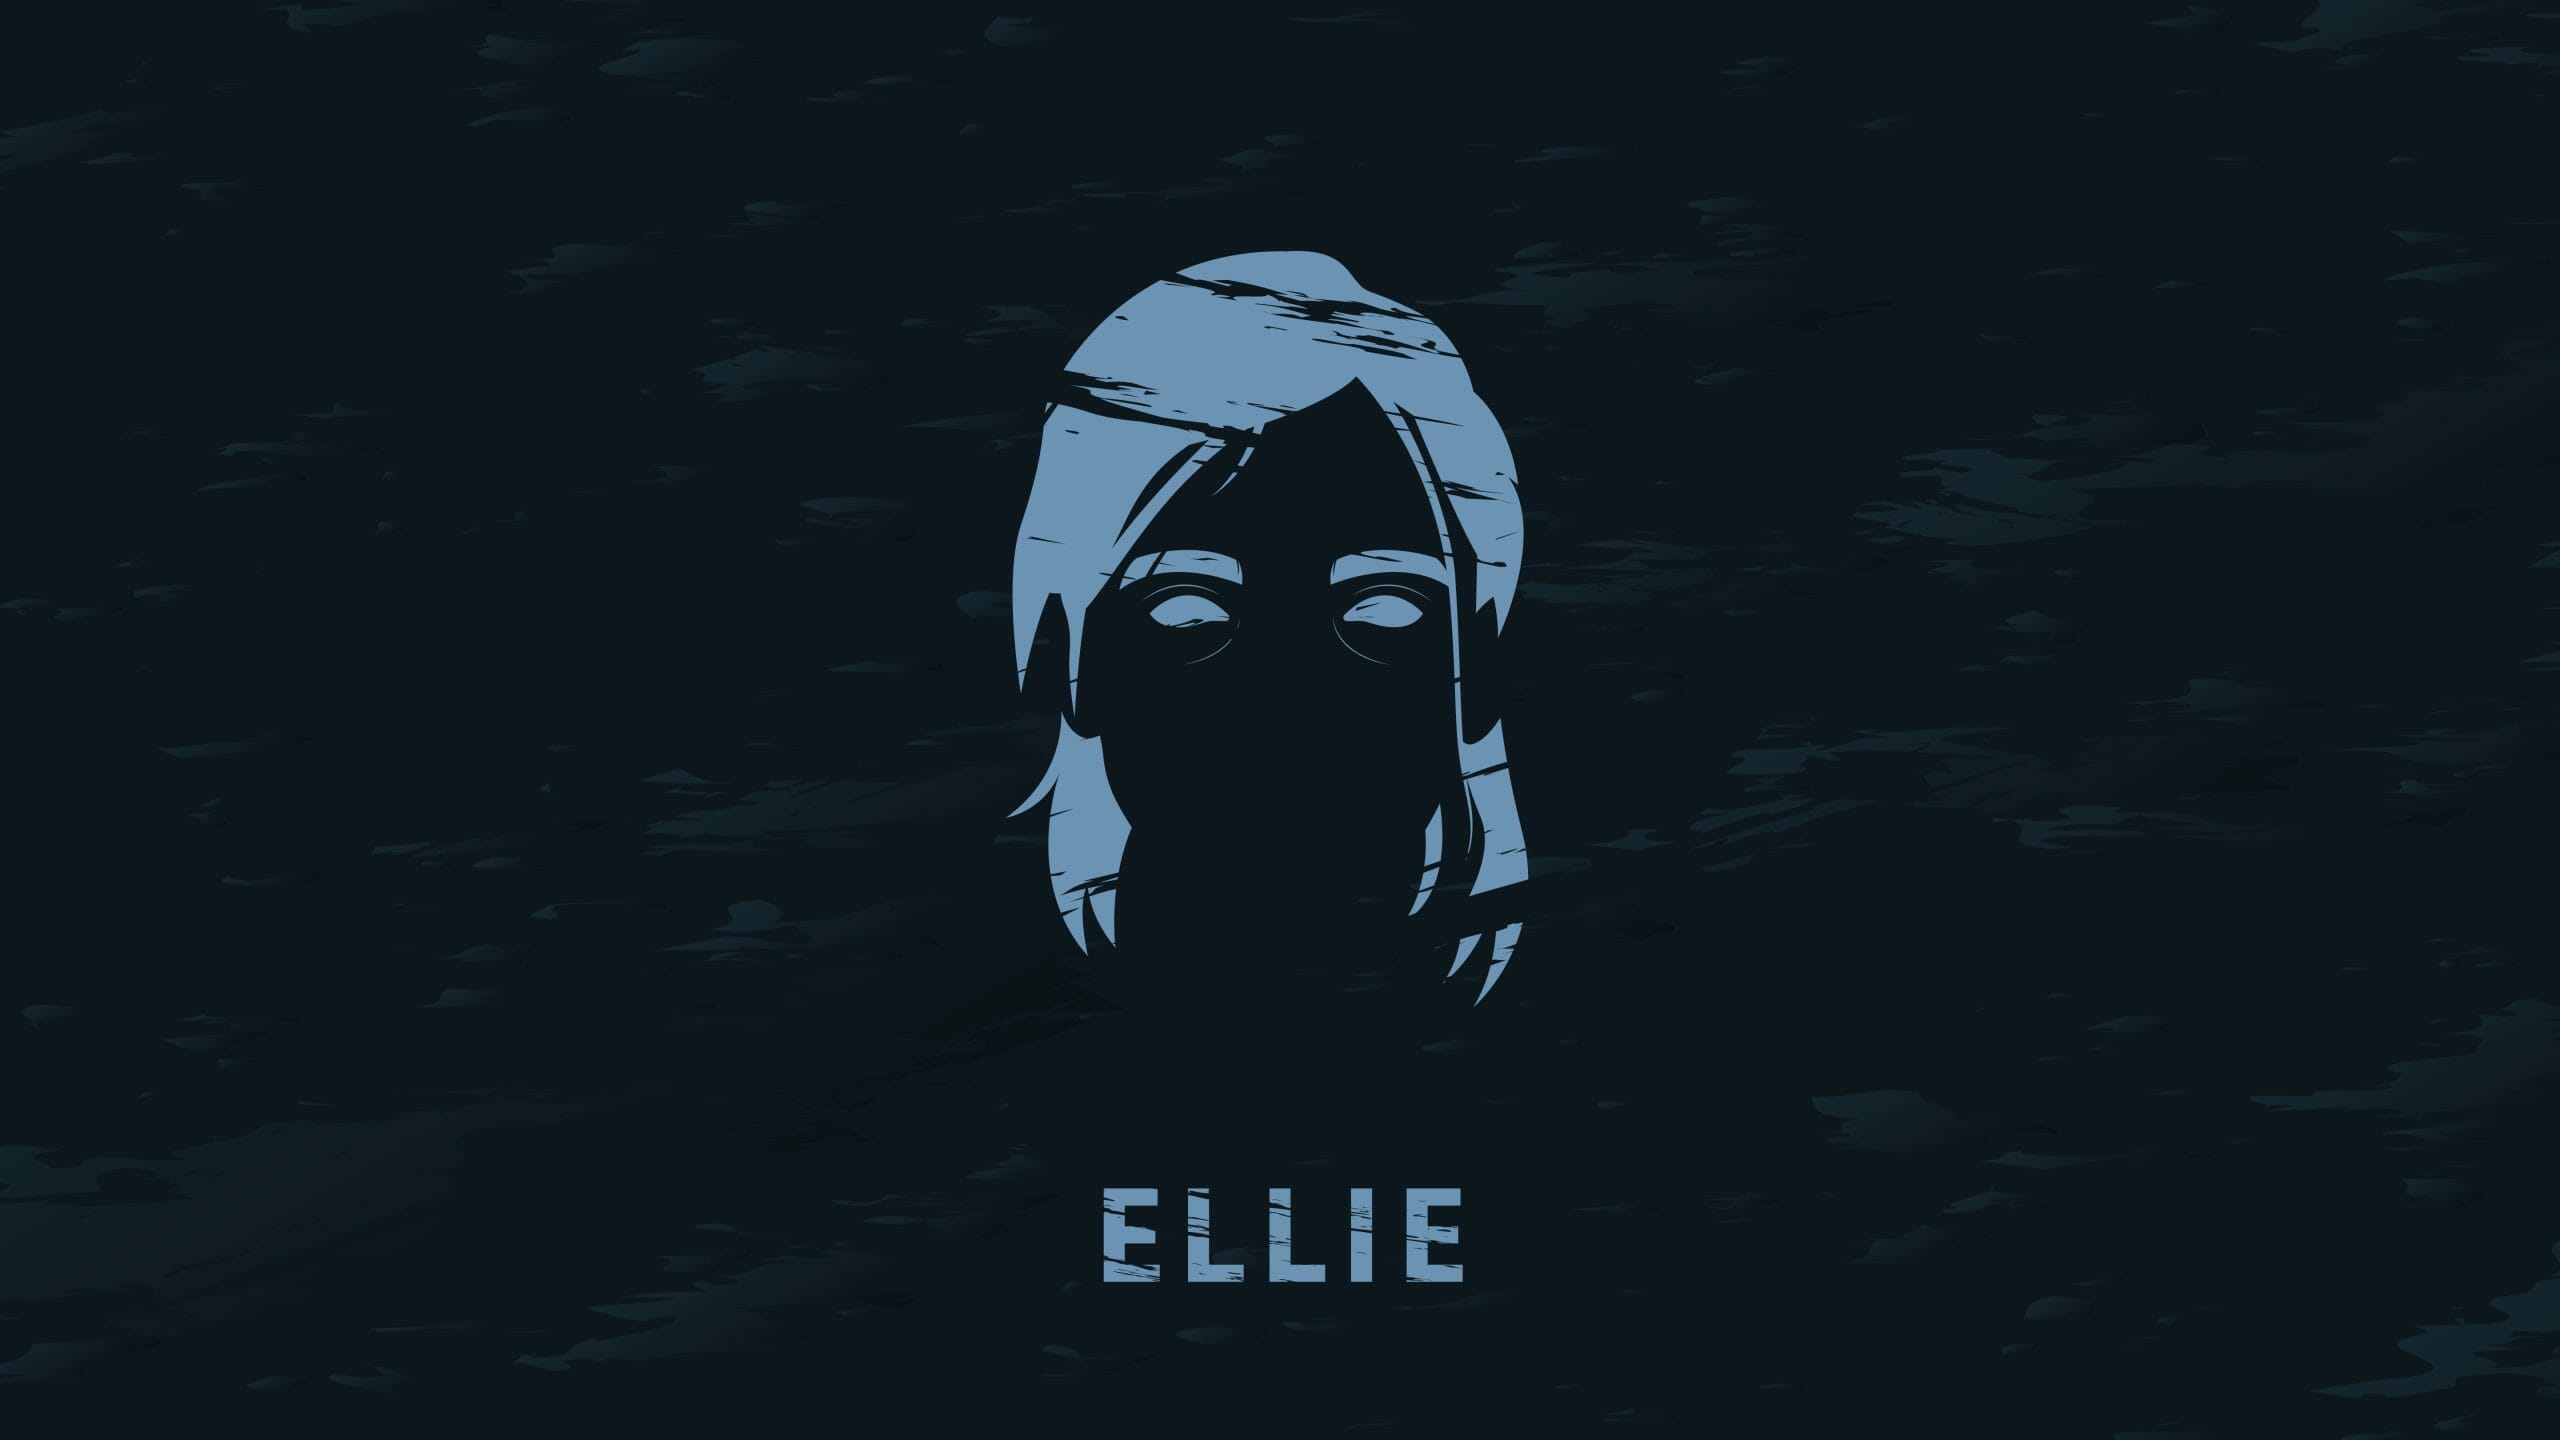 Graphic Art Depicting Ellie from The Last of Us